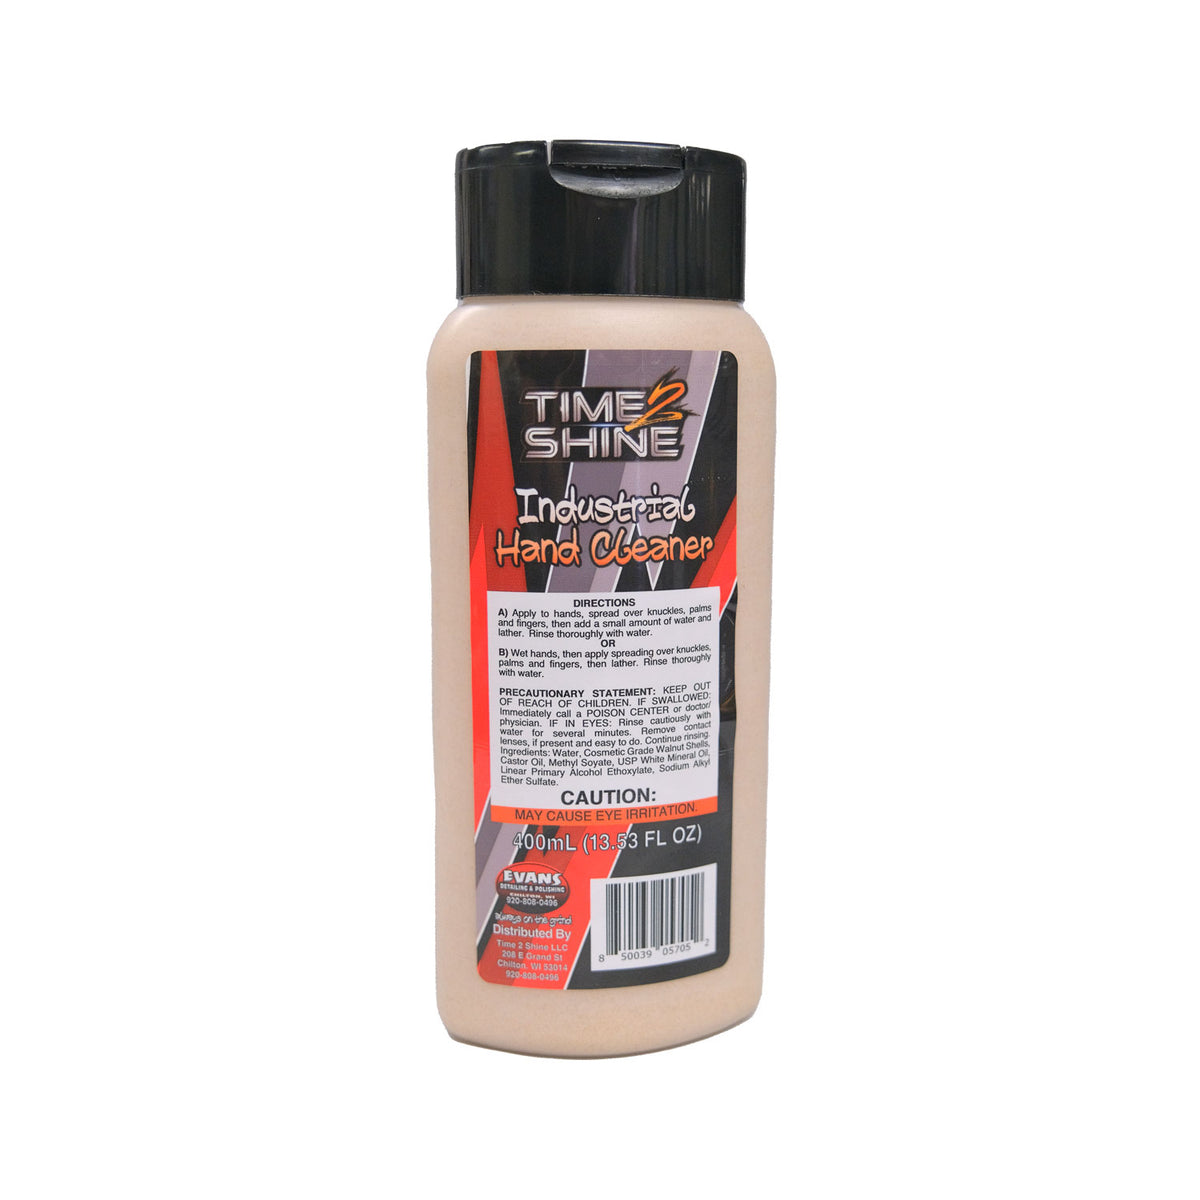 Time 2 Shine Industrial Hand Cleaner